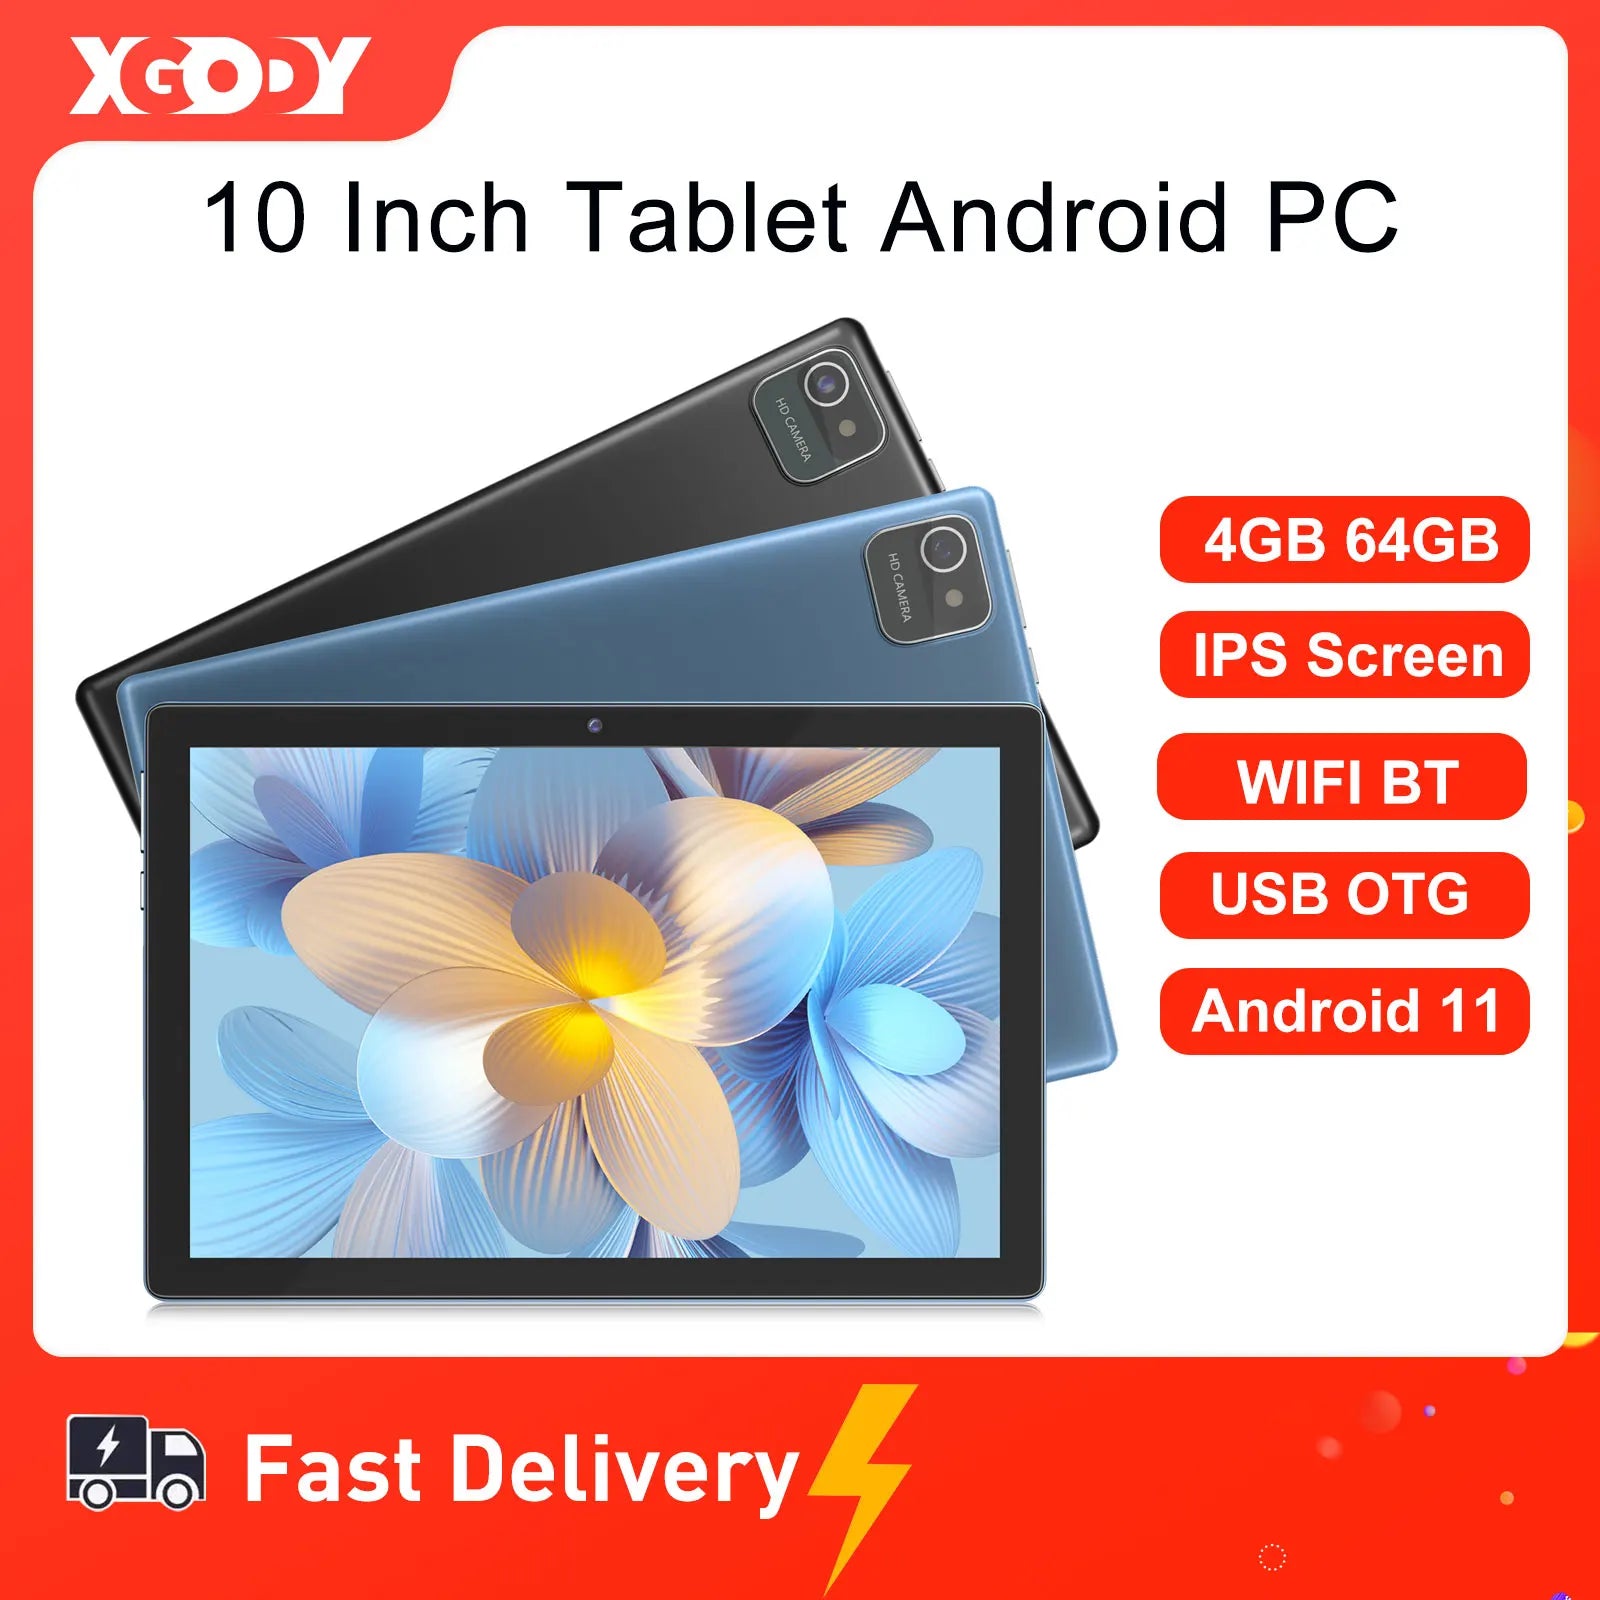 XGODY N01 Tablet 10 inch Android Tablets 4GB 64GB IPS Screen 4core Ultra-thin 5G WiFi Bluetooth GPS PC Keyboard Optional